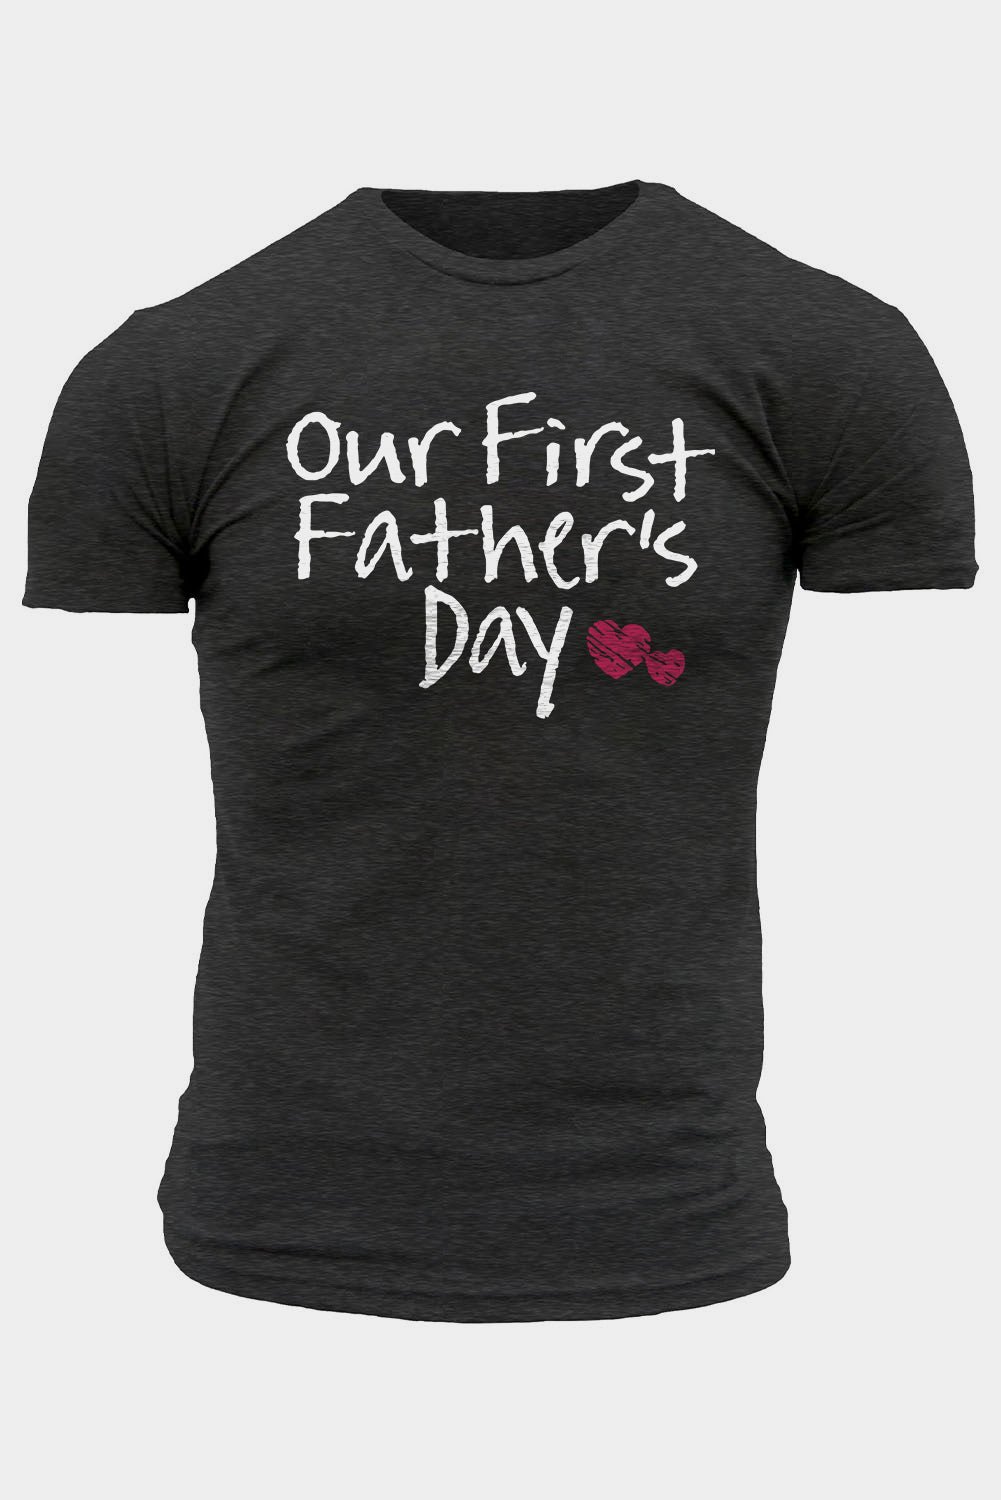 Gray Our First Father's Day Heart Print Muscle Fit Men's T Shirt Gray 62%Polyester+32%Cotton+6%Elastane Men's Tops JT's Designer Fashion